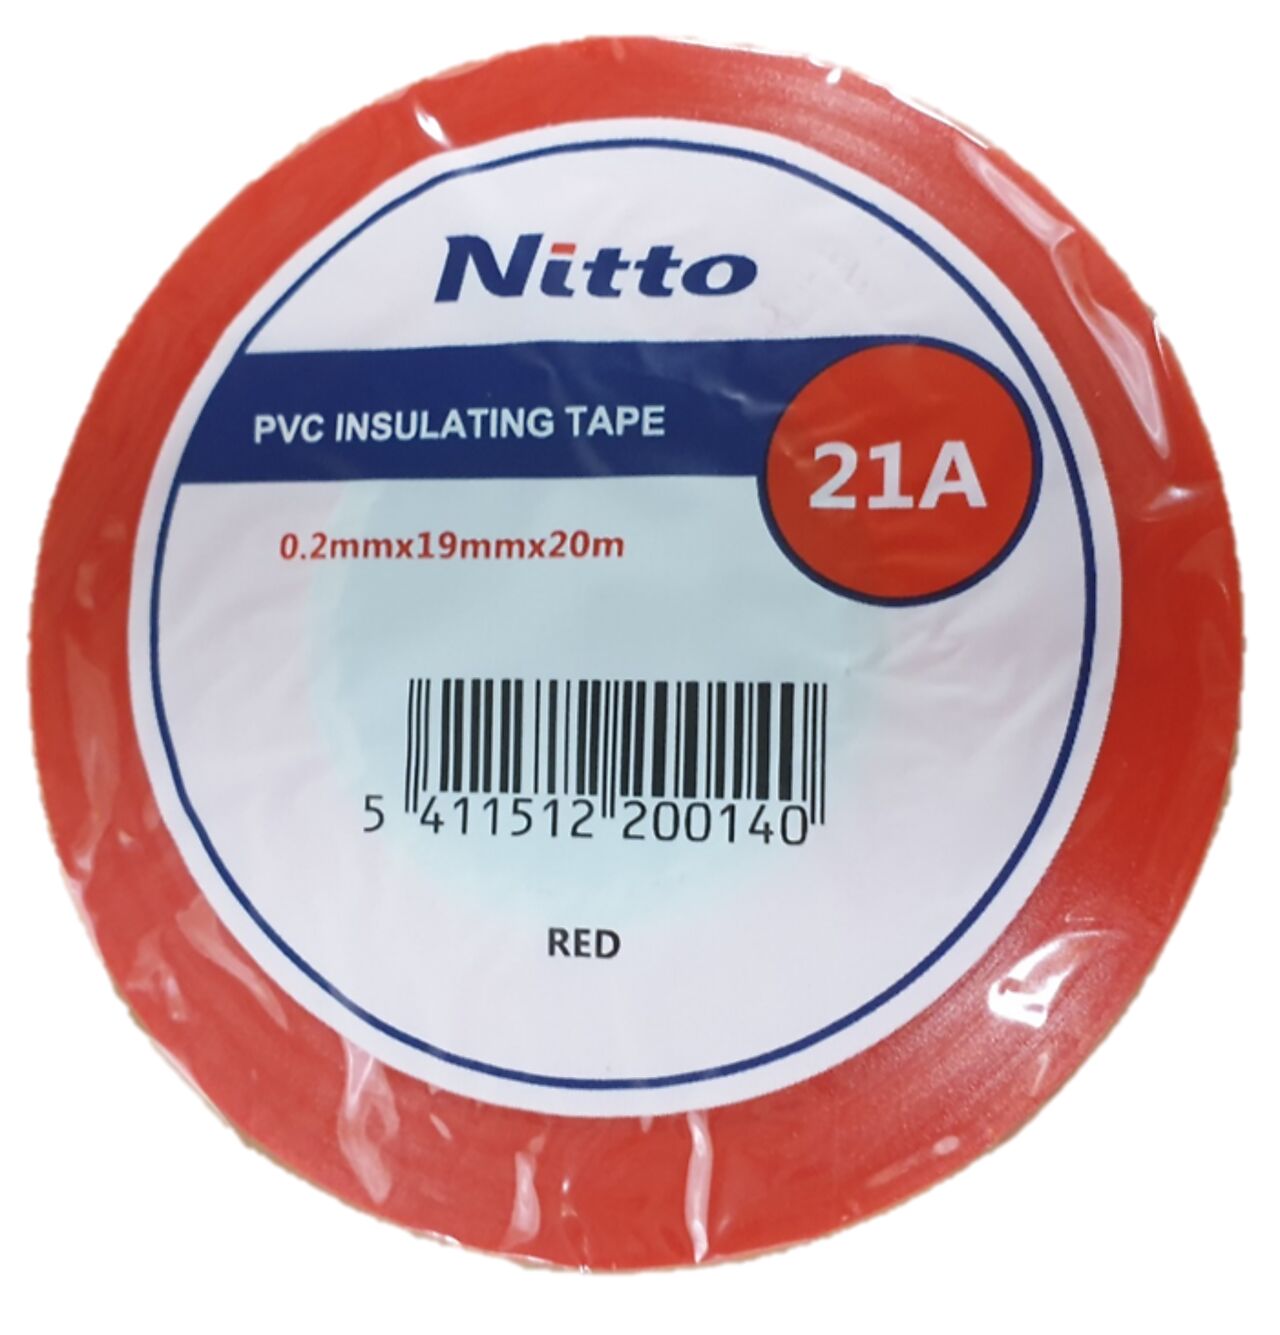 Neo-Select Nitto pvc-tape f/isolering, n21a 19mm x 20m rød 1